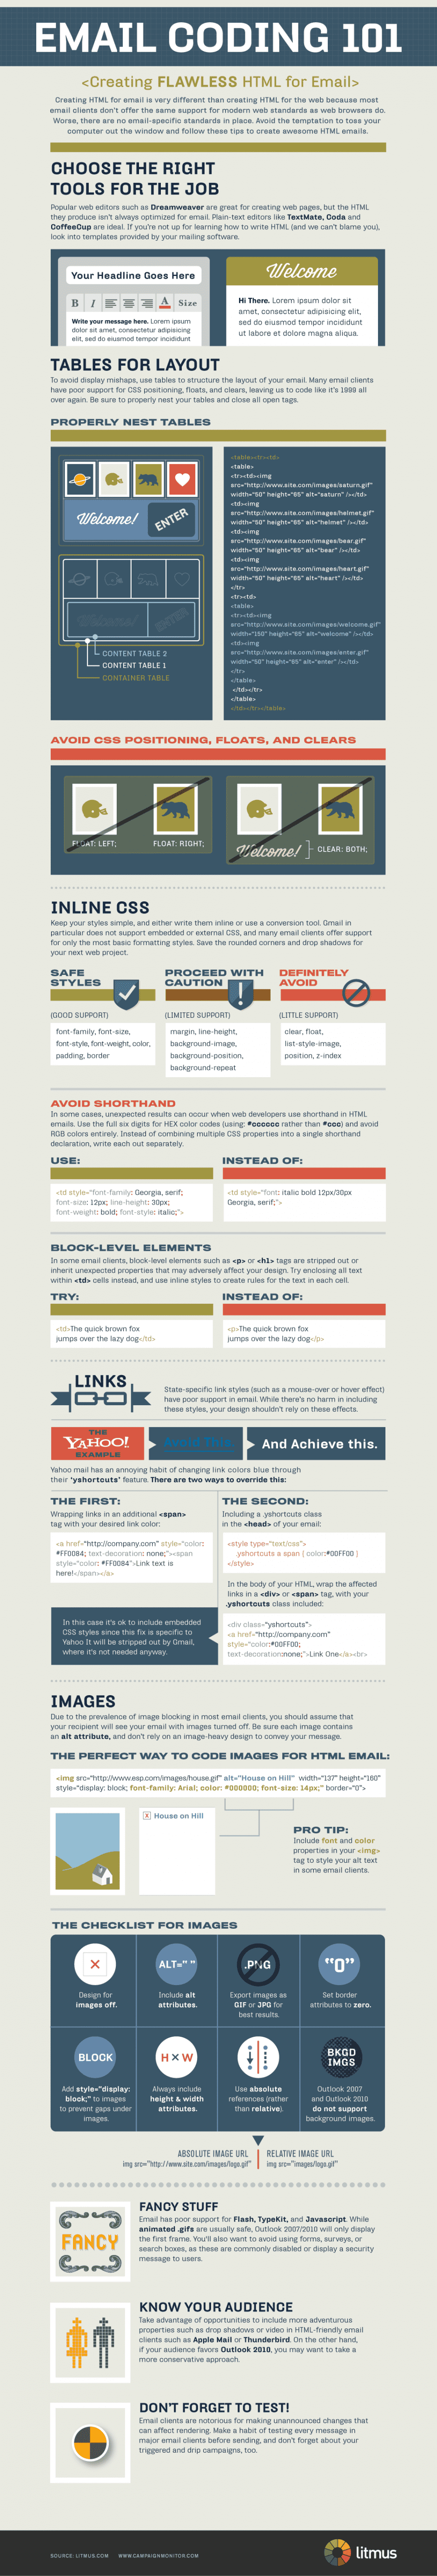 Email Coding 101 Infographic